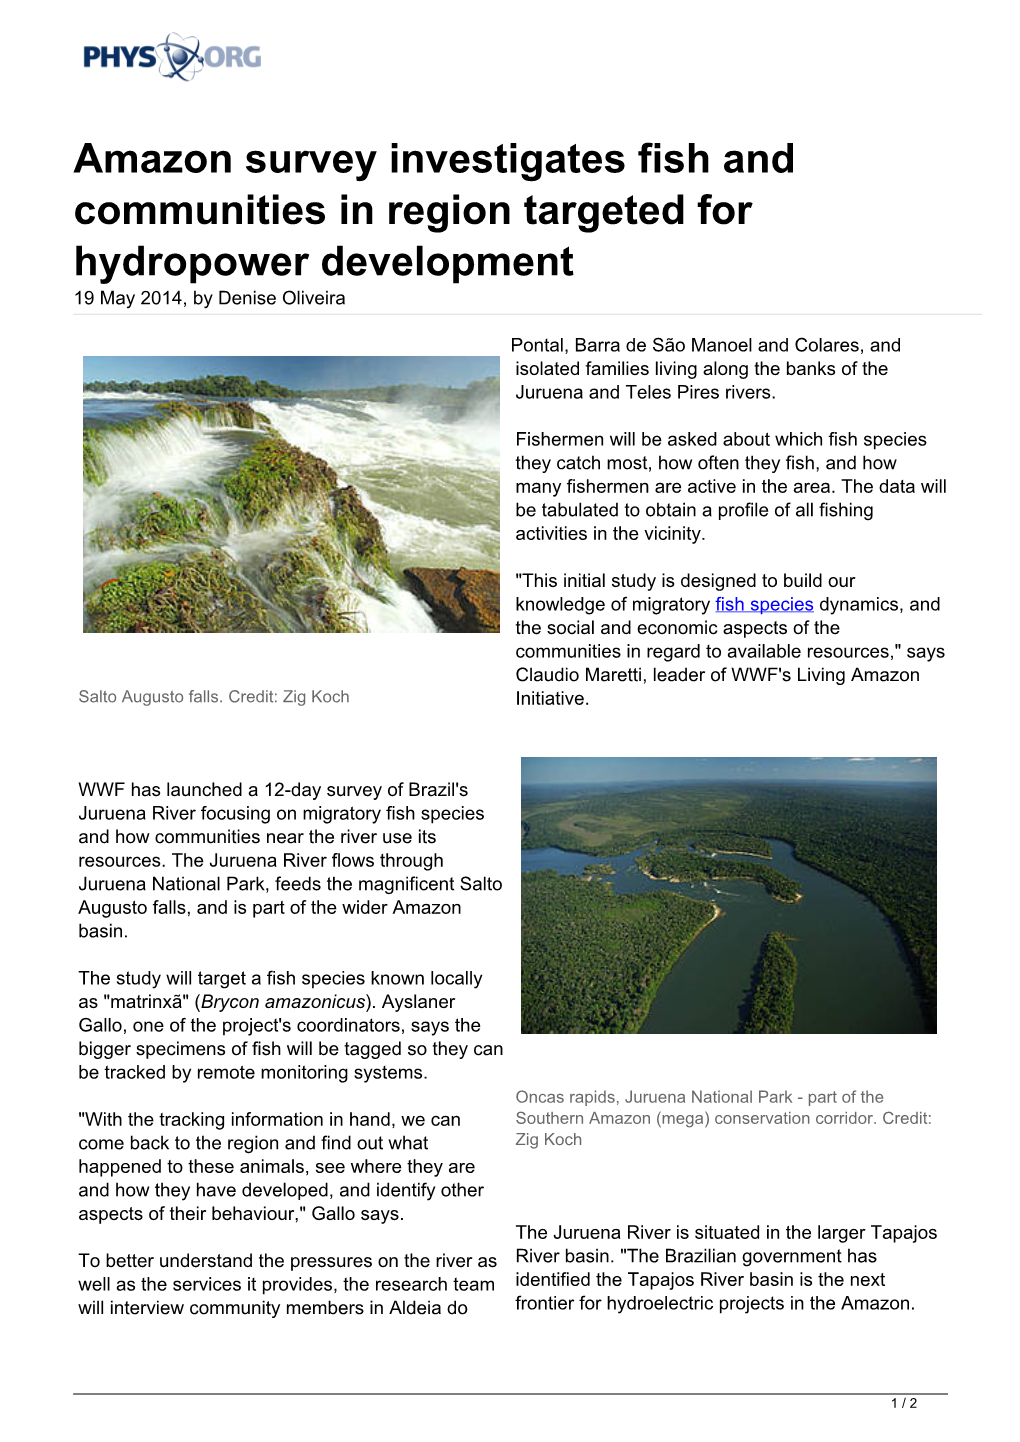 Amazon Survey Investigates Fish and Communities in Region Targeted for Hydropower Development 19 May 2014, by Denise Oliveira